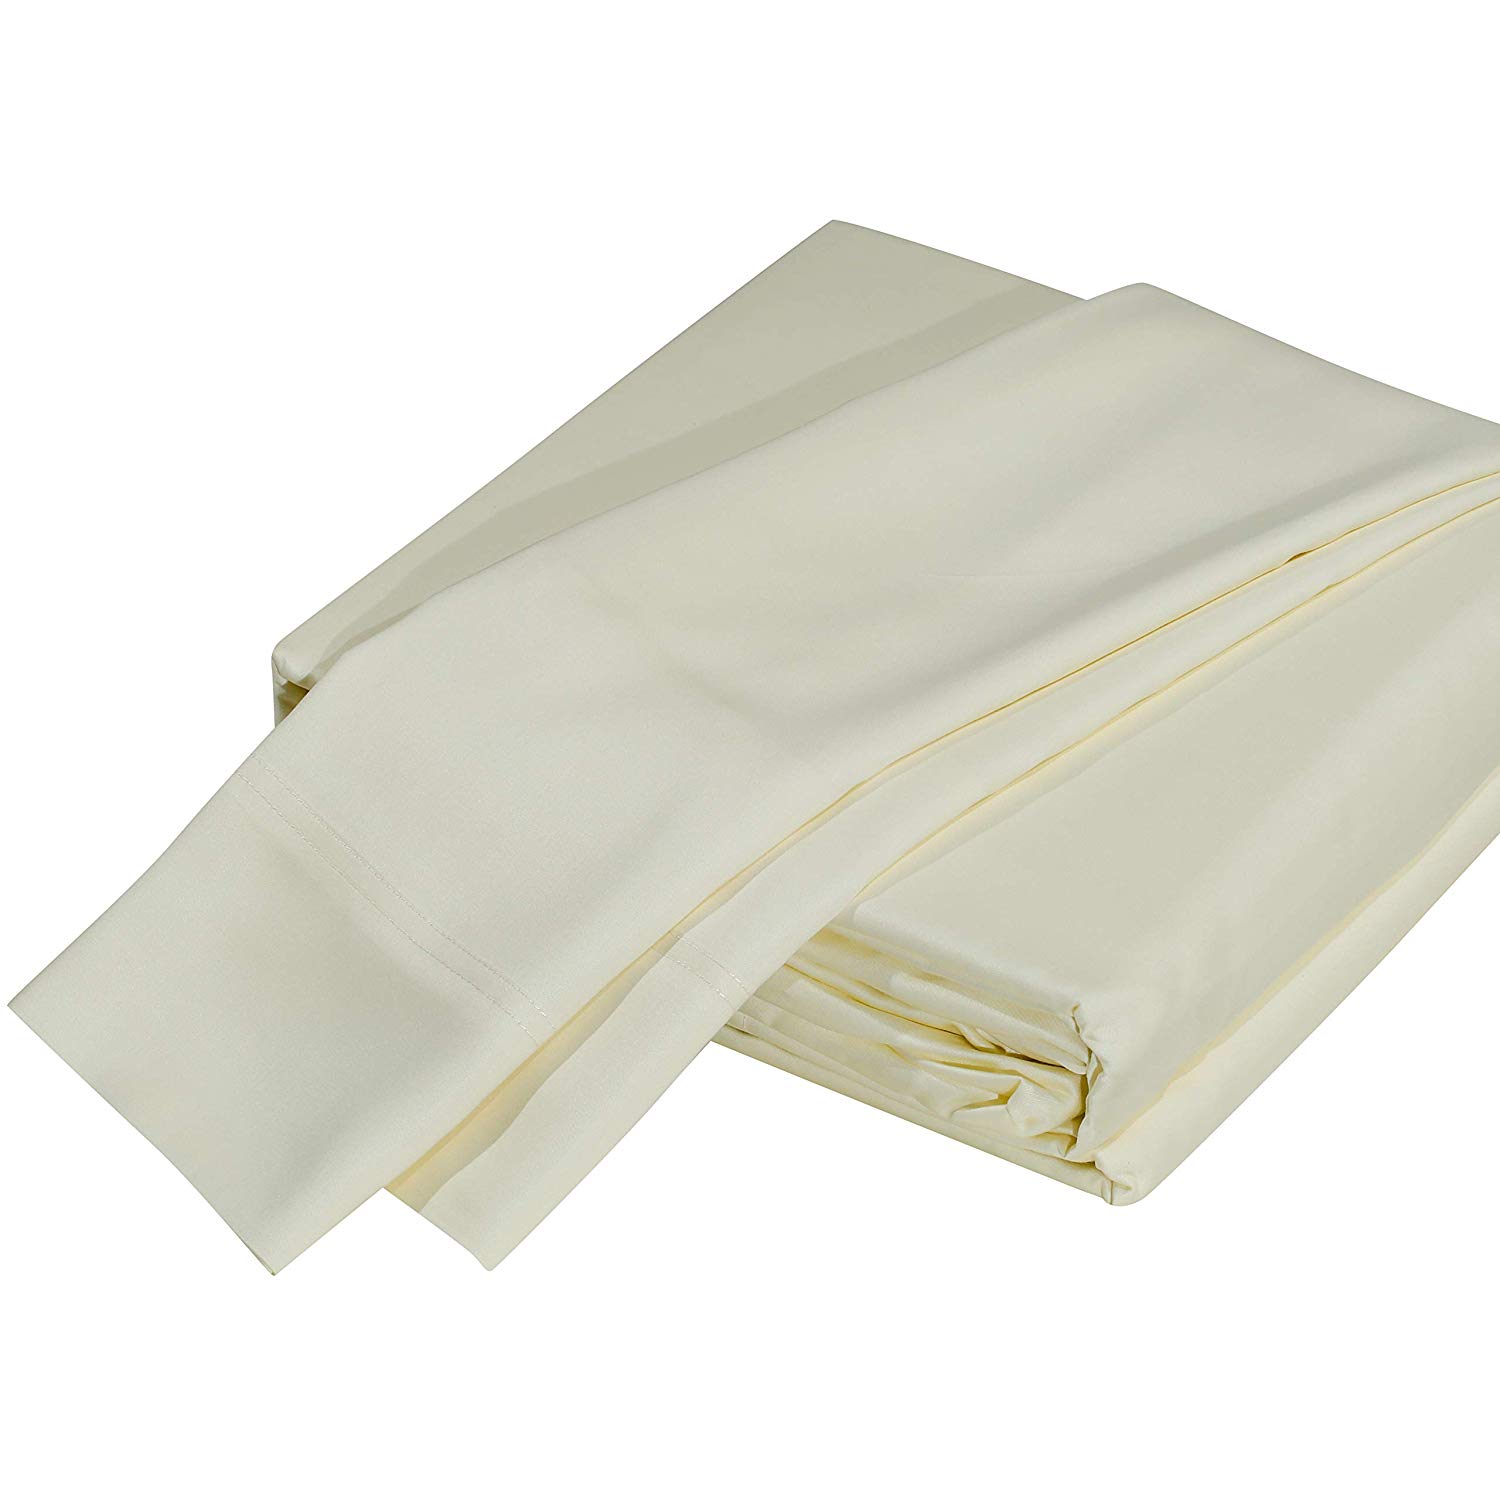 Read more about the article DTY Bedding Premium Queen Bamboo Sheets – Luxuriously Soft and Comfortable 4-Piece Bamboo Bed Sheet Set from 100% Bamboo Viscose